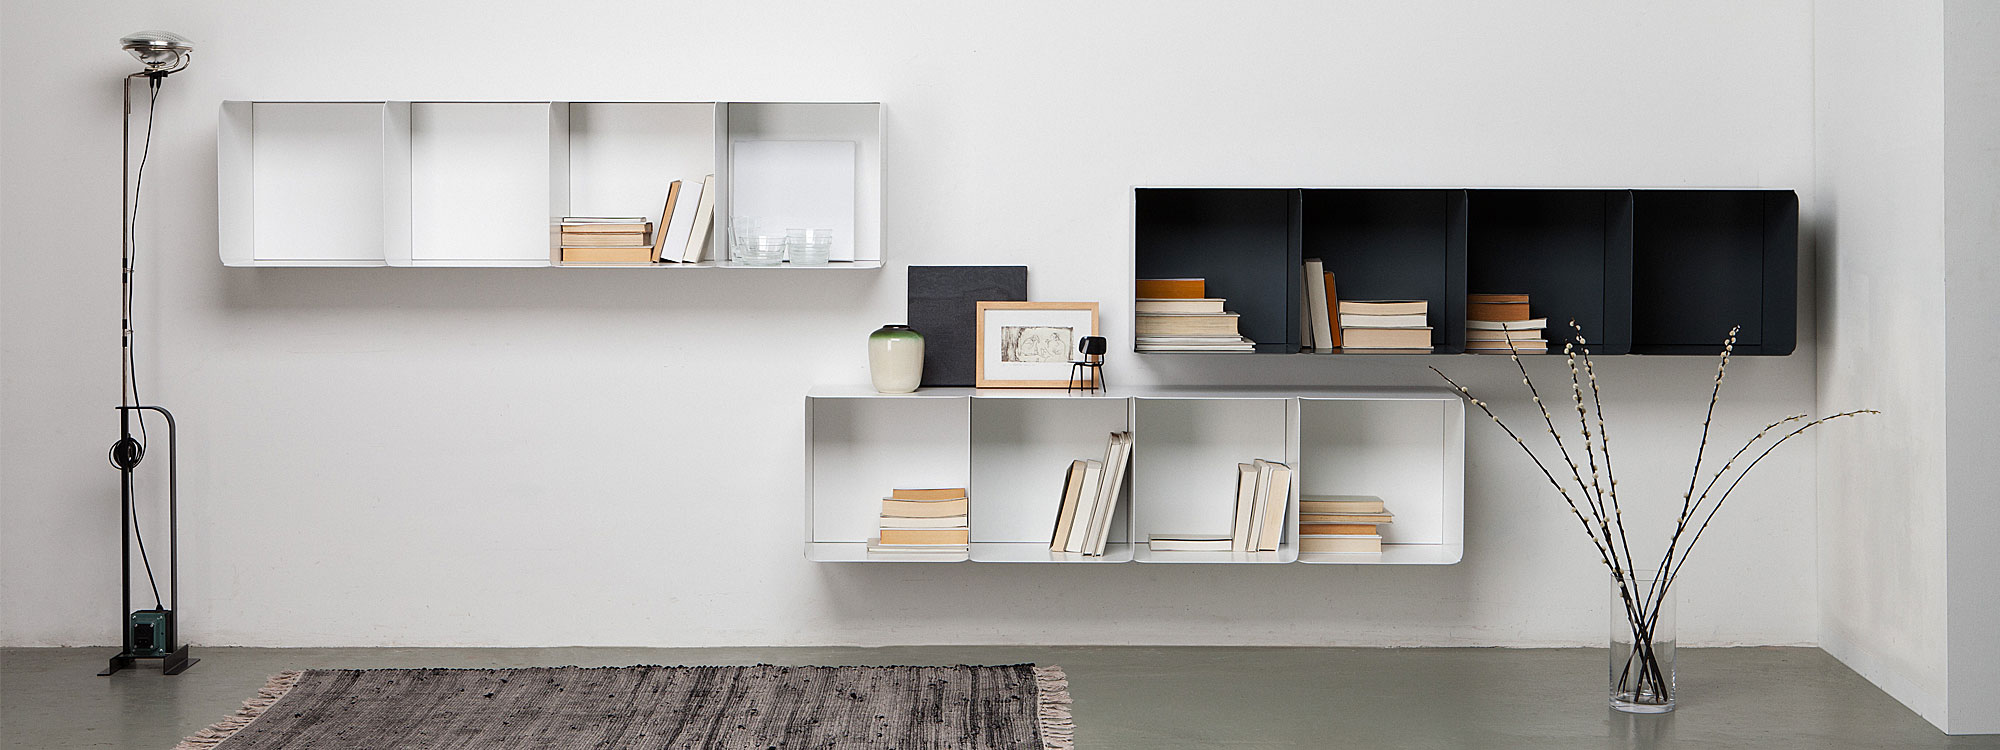 Quodes Collar Modern Design Storage System - Contemporary Chest of Drawers, Cabinet, Book Case By Nendo. Modern European Furniture In High Quality Materials.